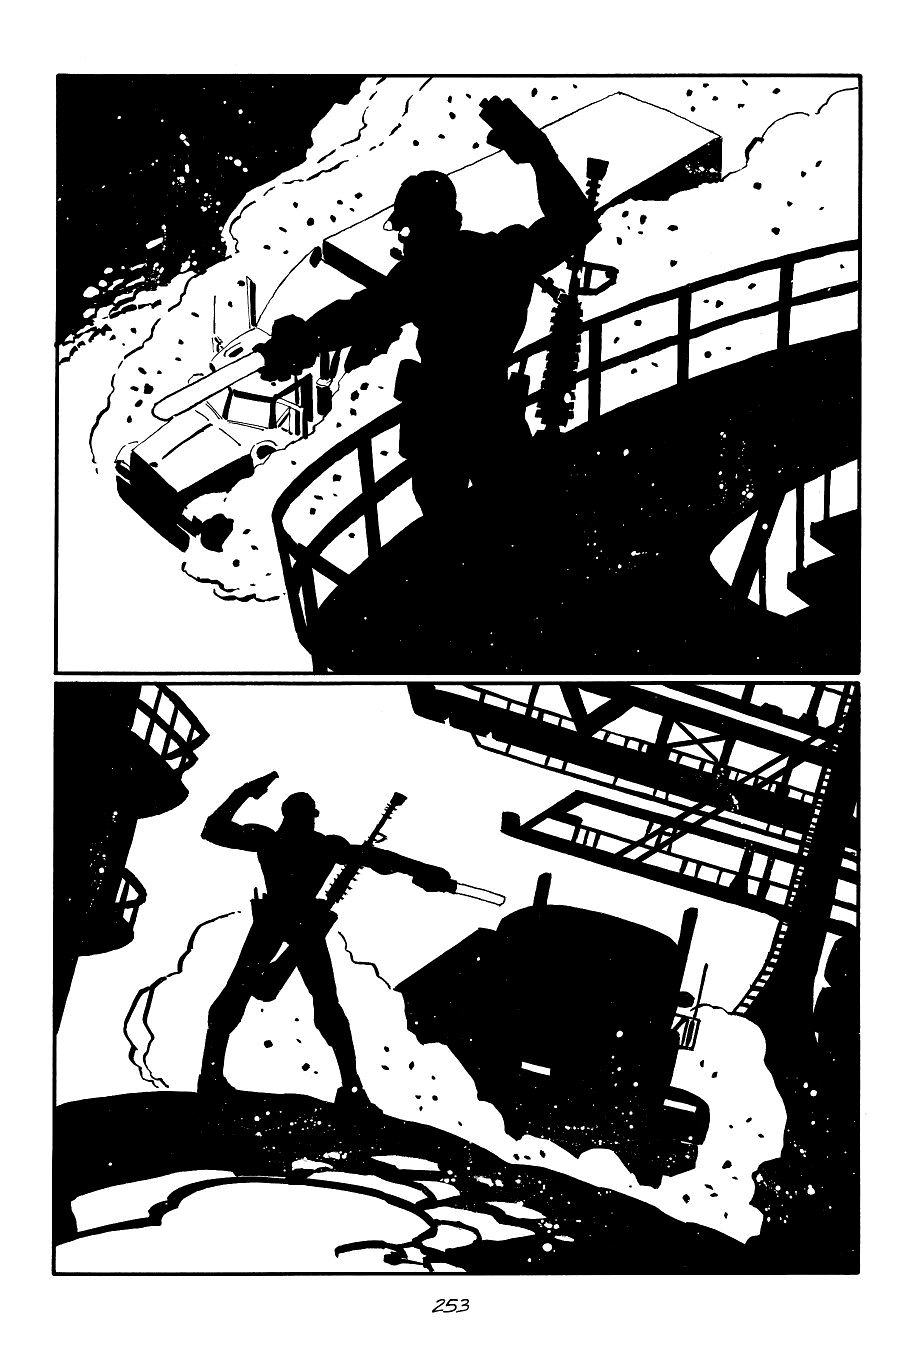 page 253 of sin city 7 hell and back